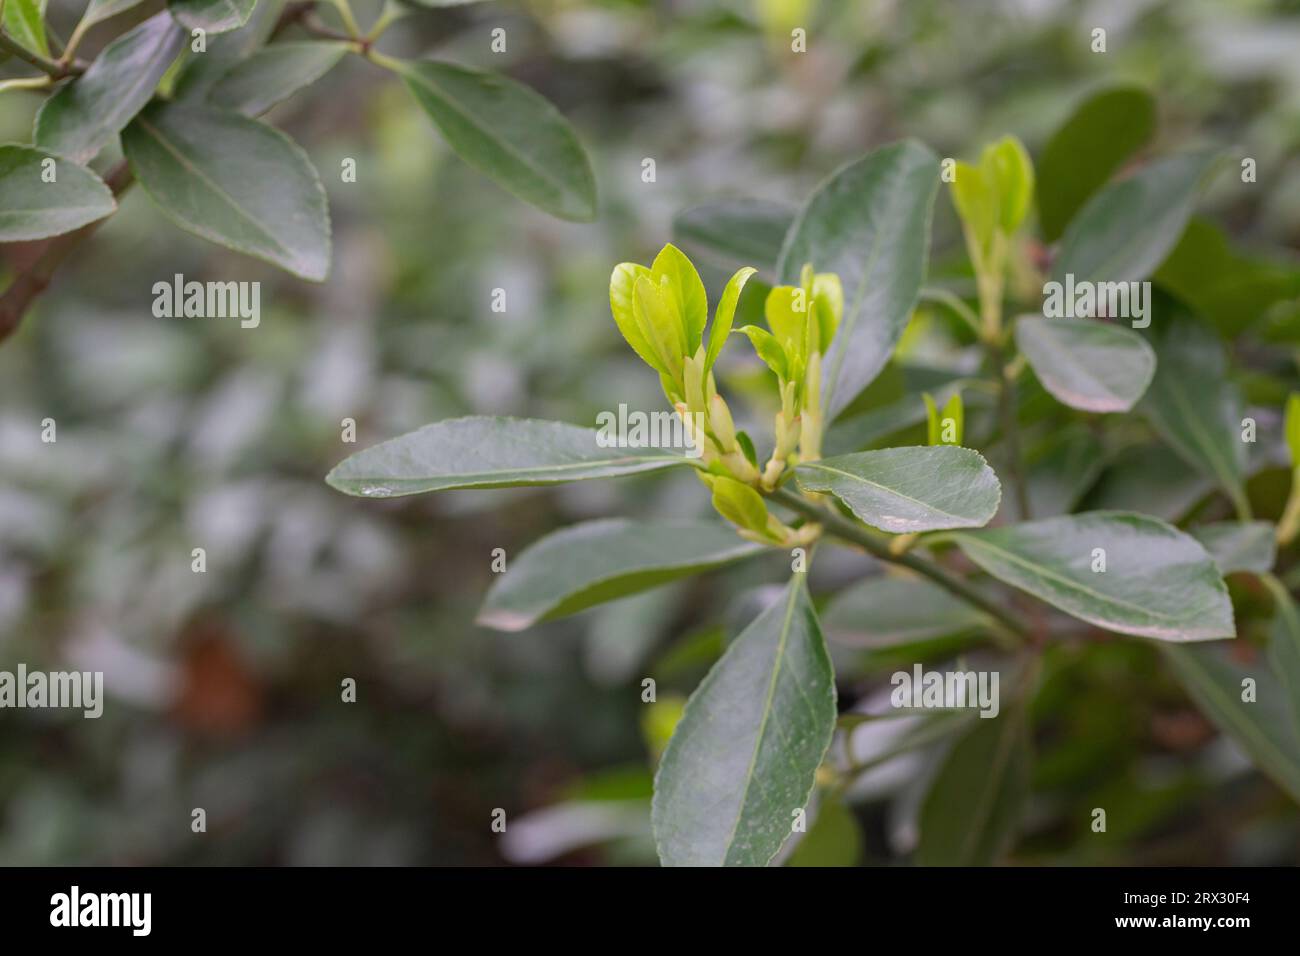 euonymus japonicus or japanese euonymus green shrub plant background in spring, fresh young leaves selective focus Stock Photo